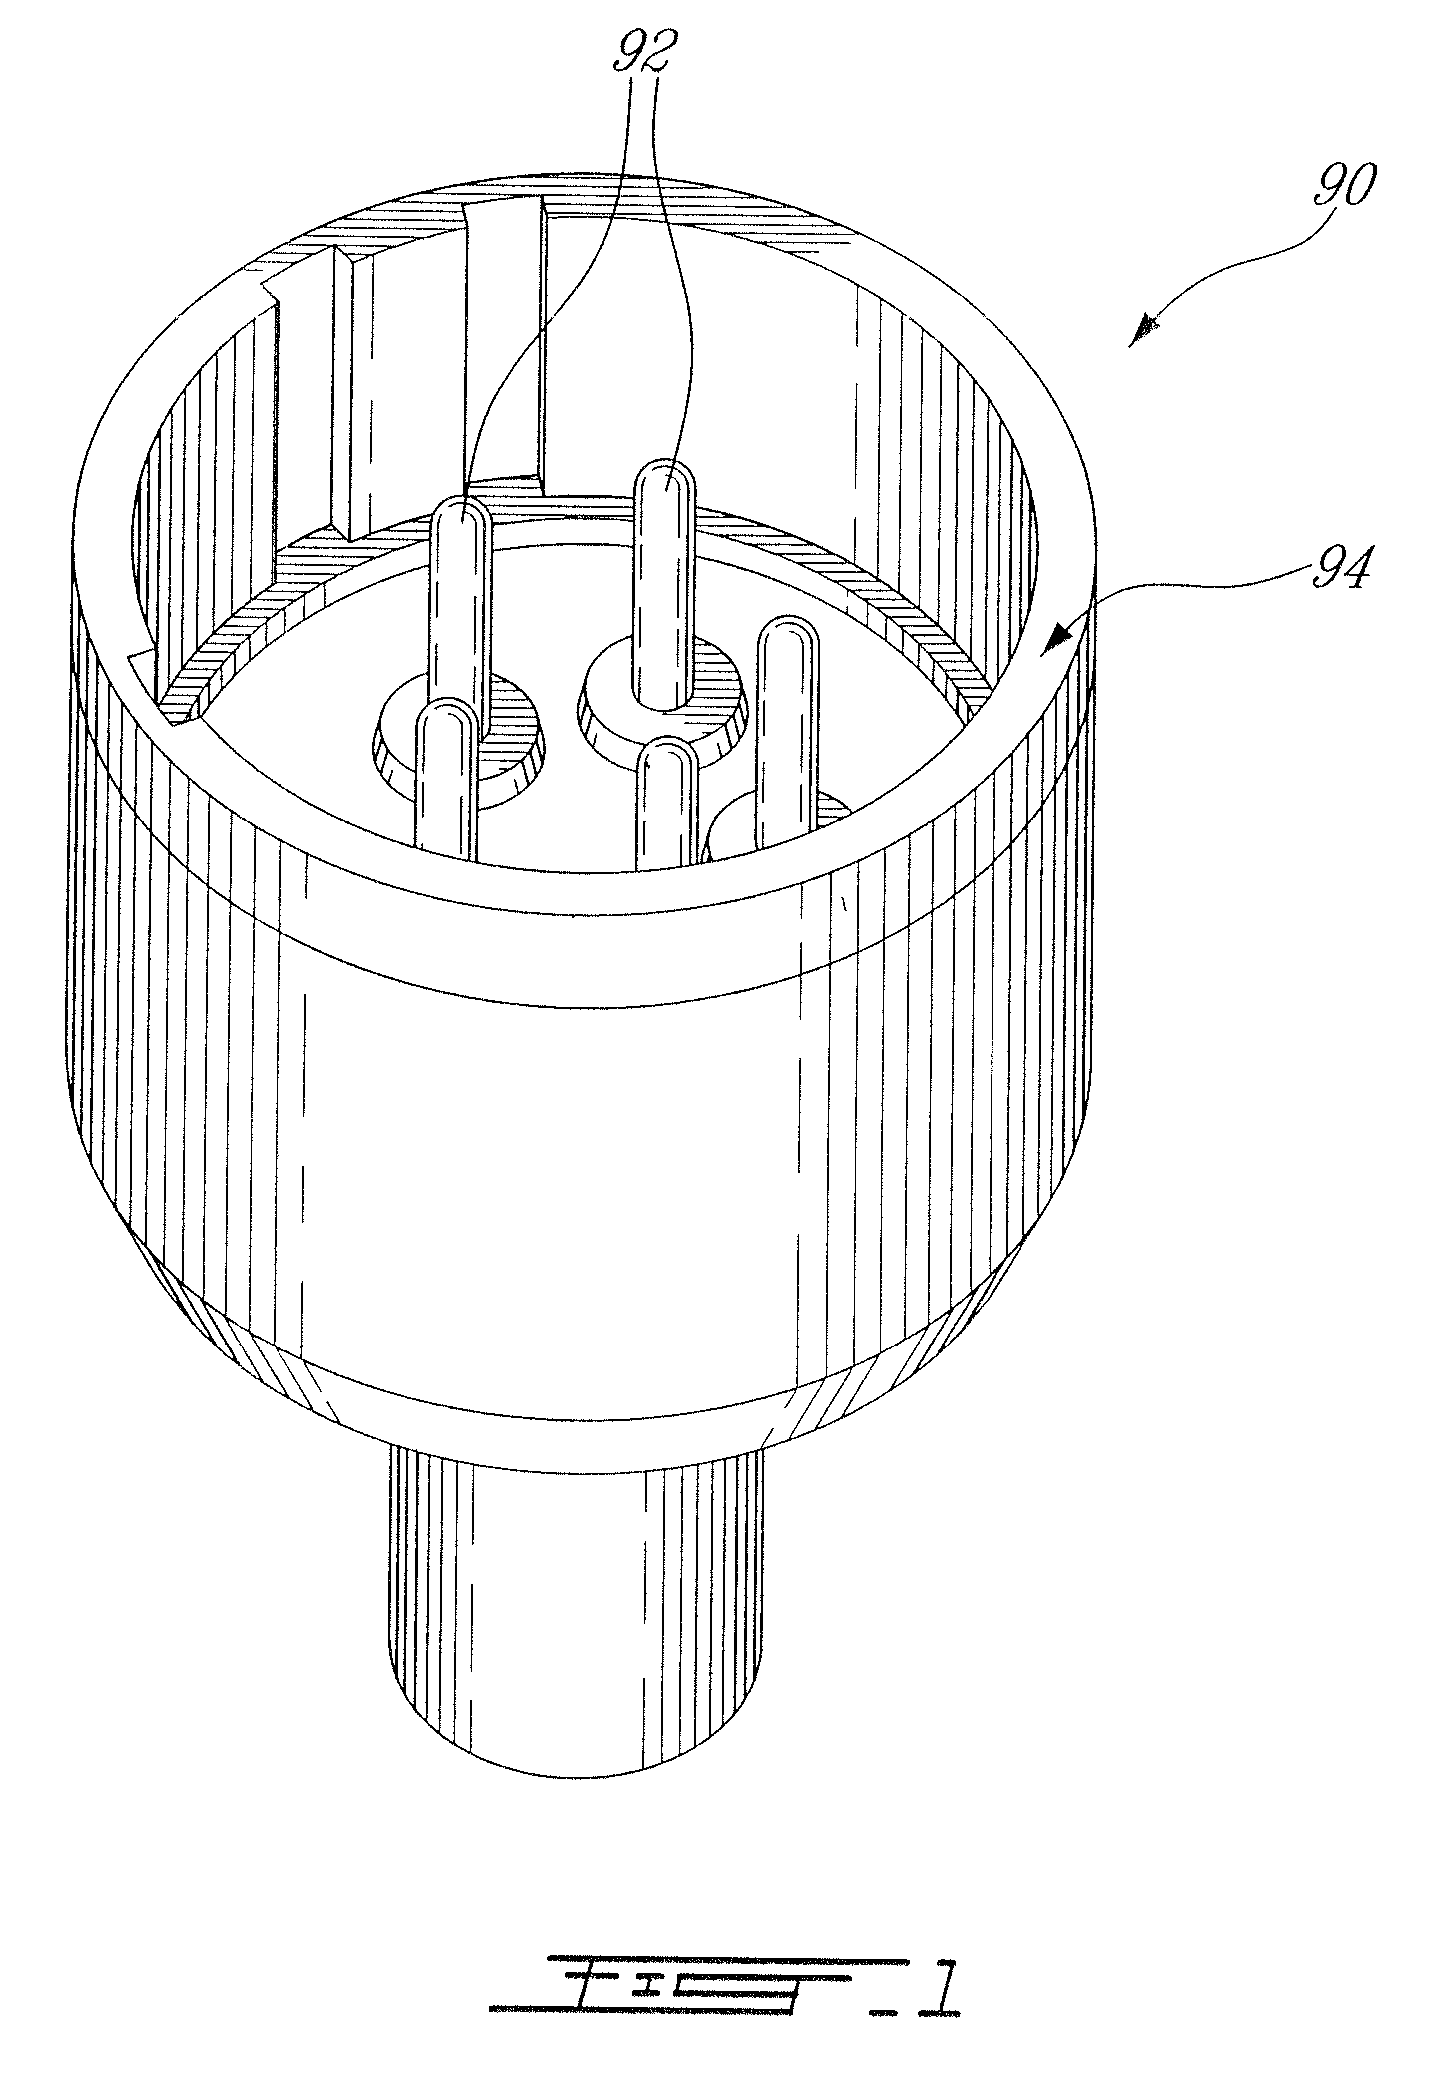 Abrading tool and method for refurbishing electrical connector pin contacts